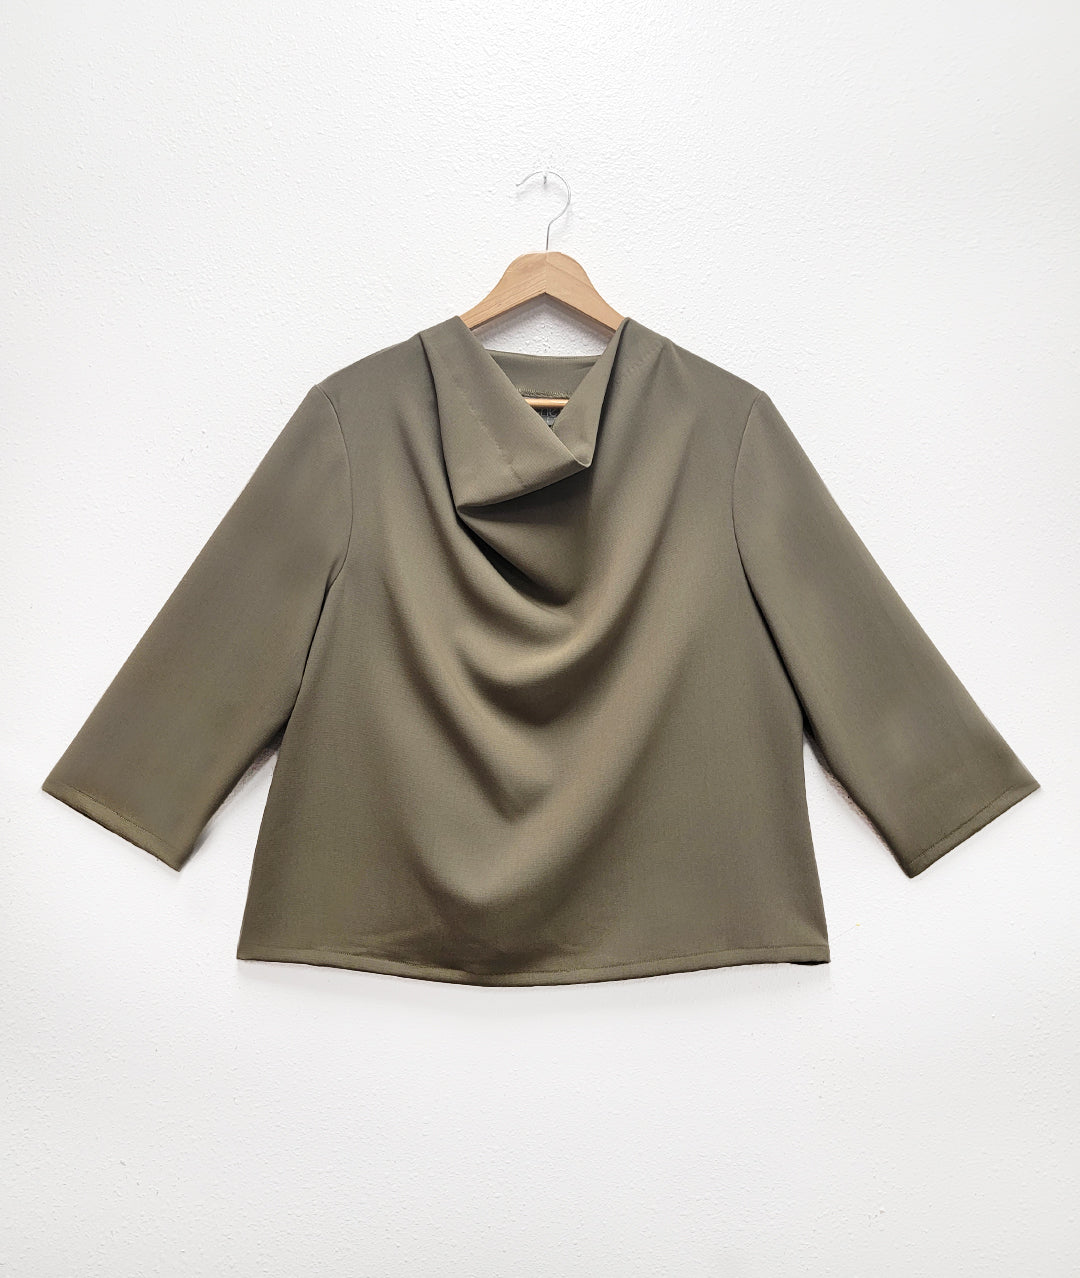 sage green boxy pullover top with a soft cowl neckline